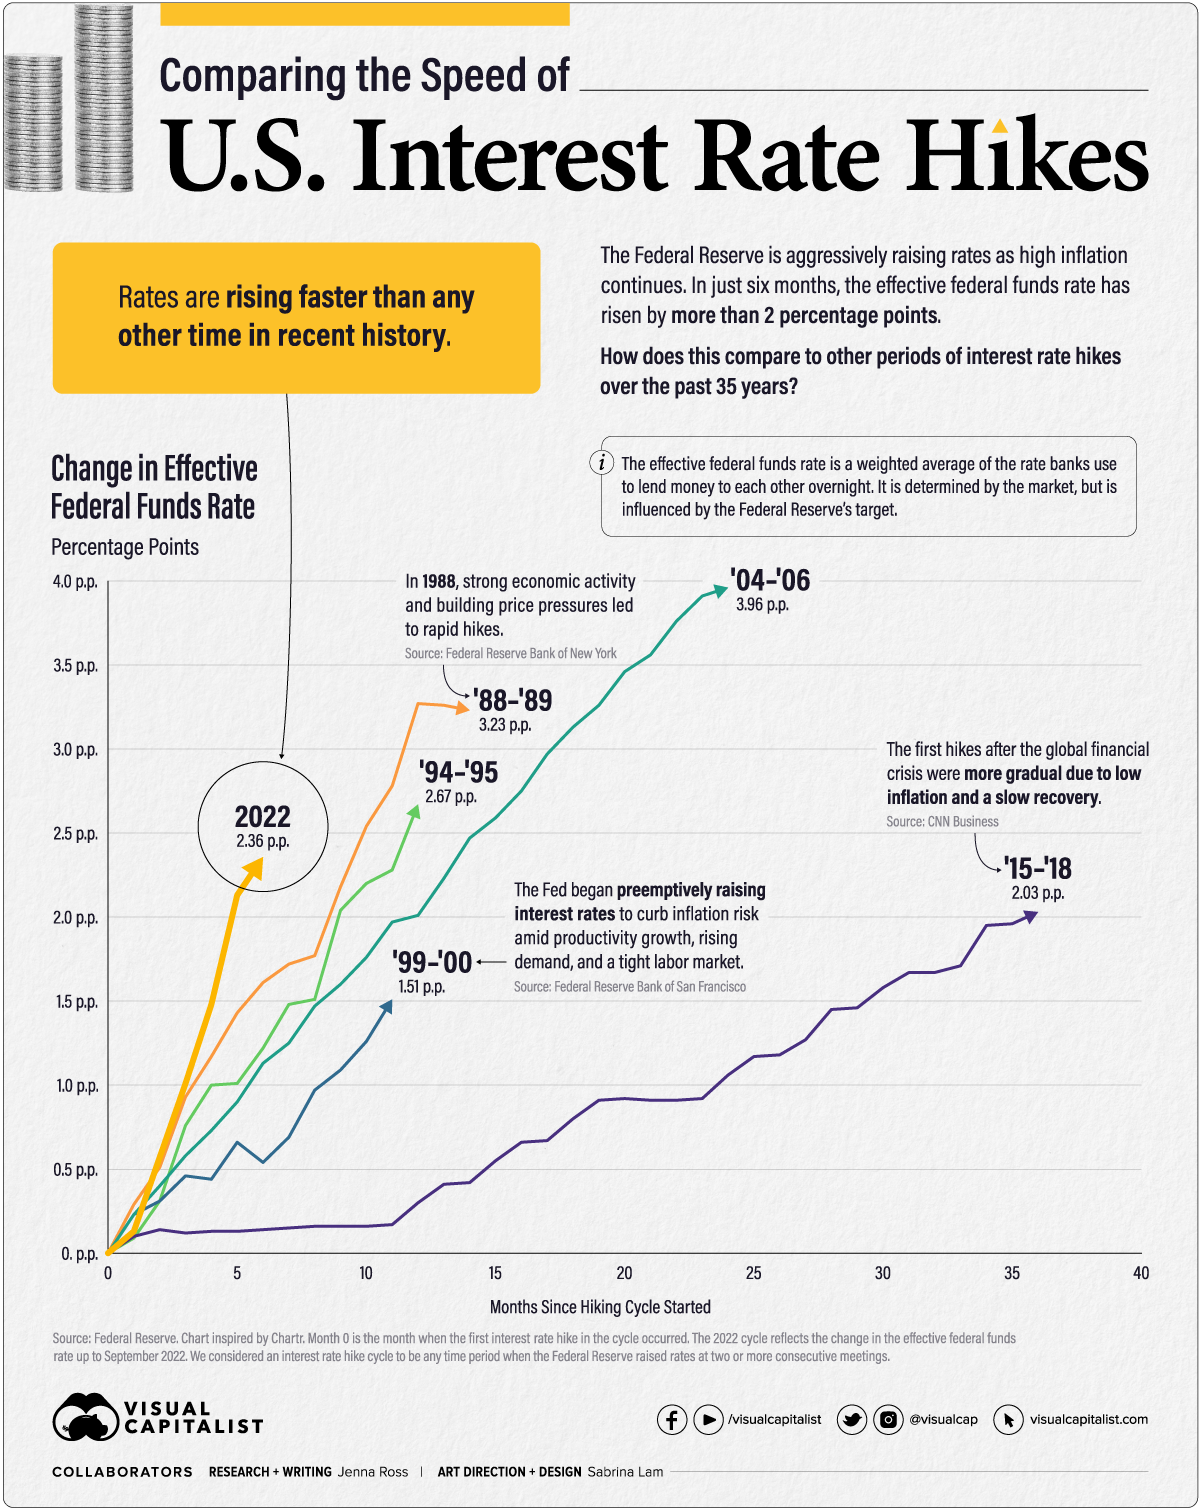 Comparing the Speed of U.S. Interest Rate Hikes (1988-2022)